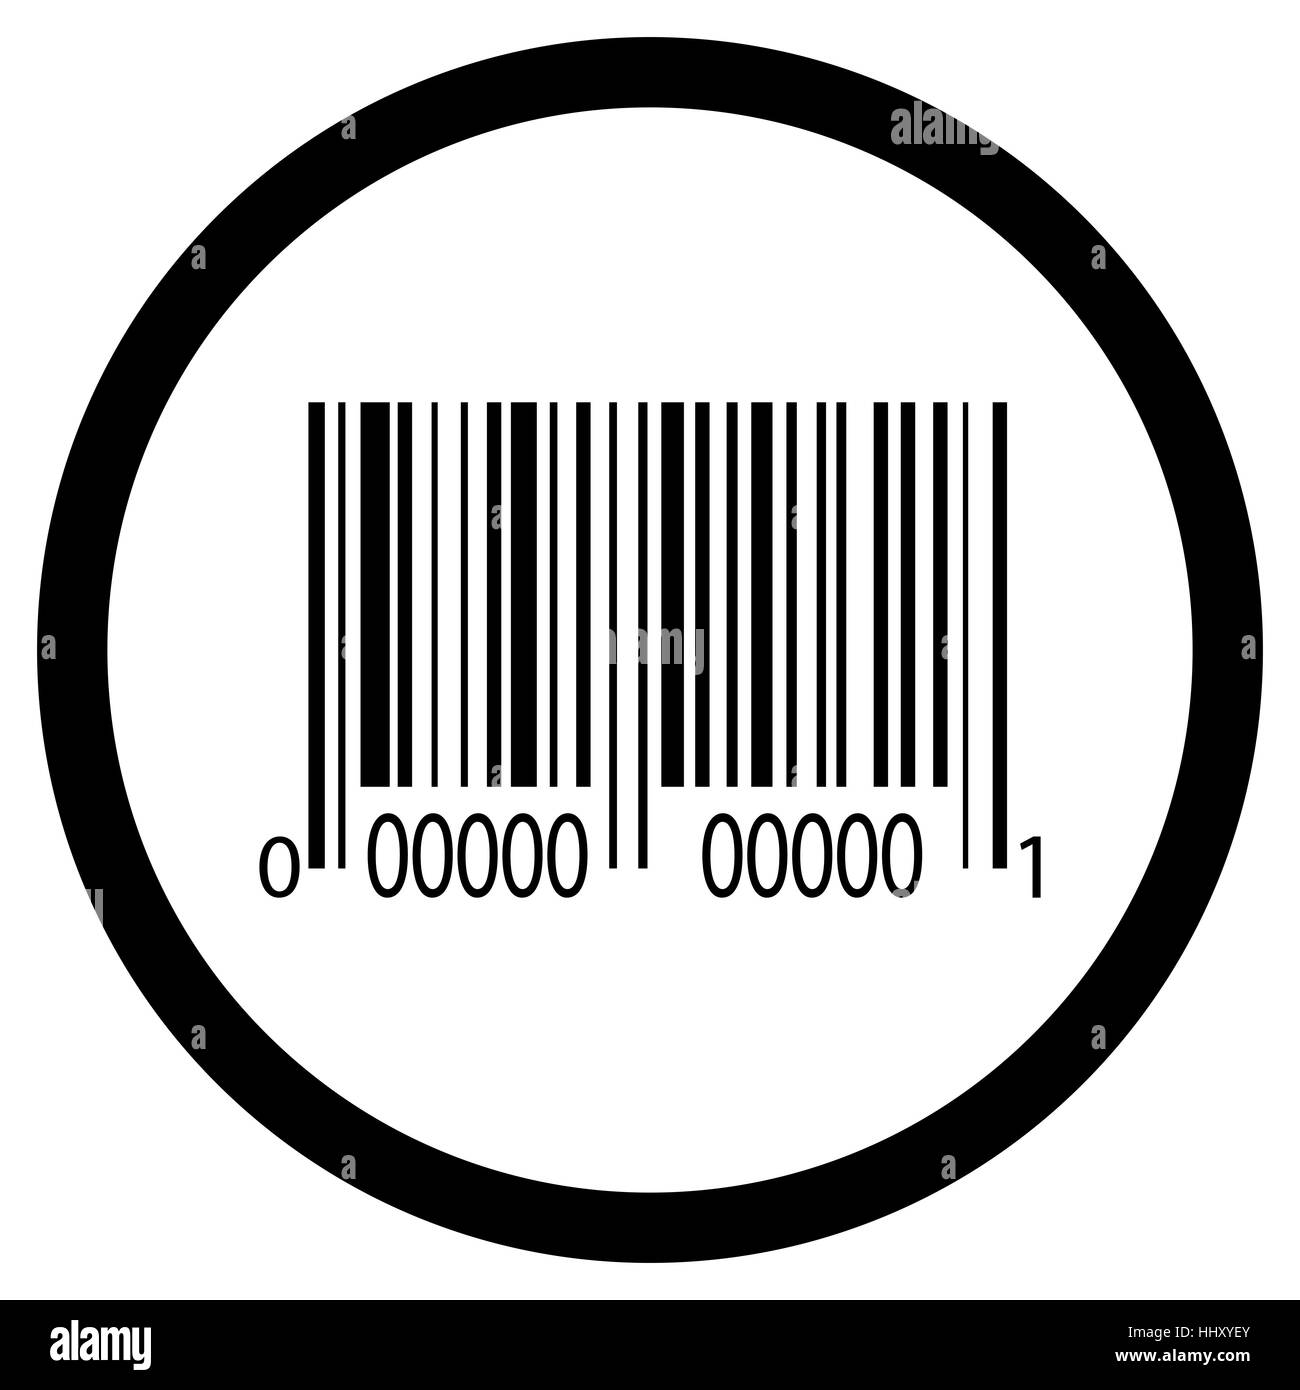 Bar code icon vector. Digital price label code for retail, graphic barcode illustration Stock Photo